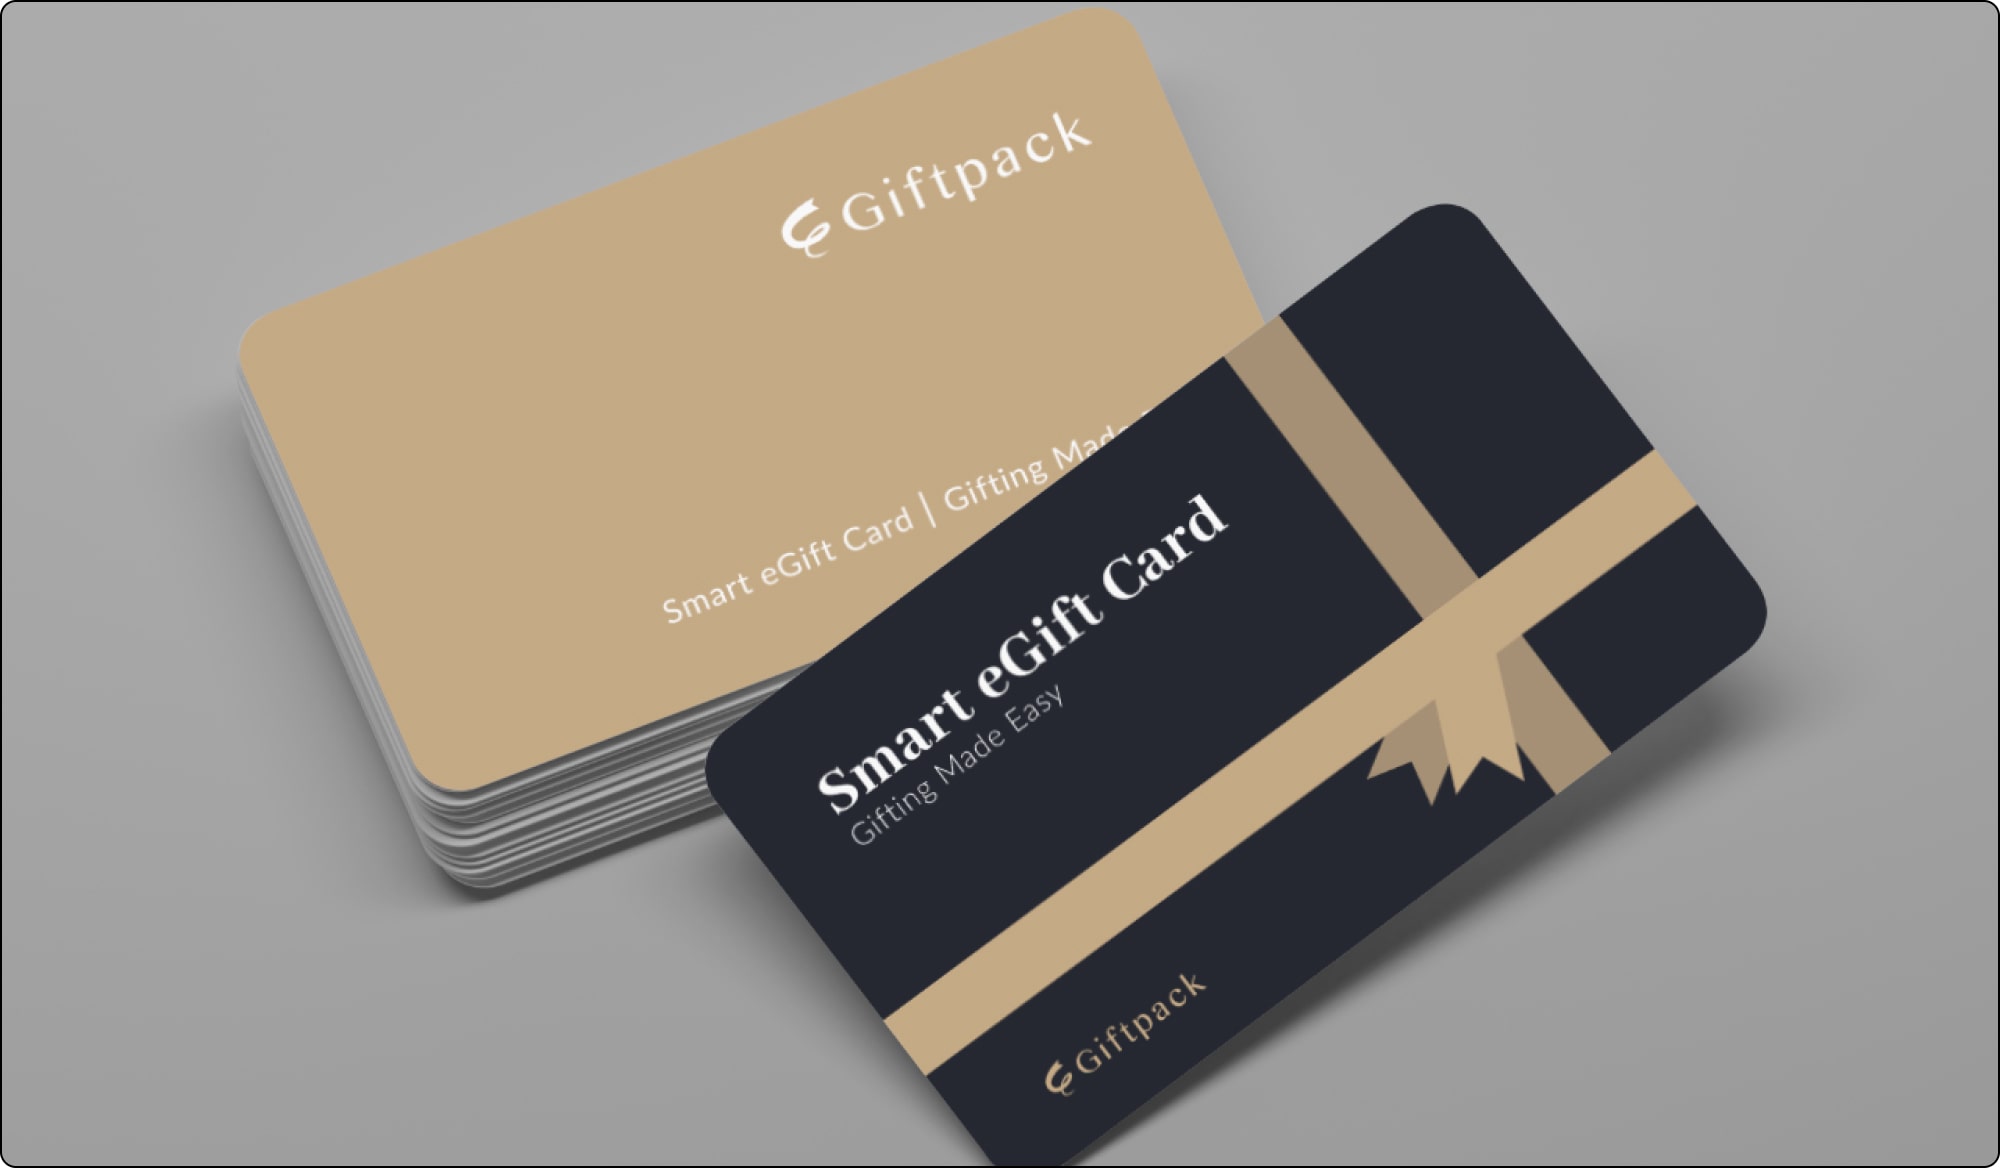 giftpack smart egift card for 350 brands for unique employee appreciation gifts